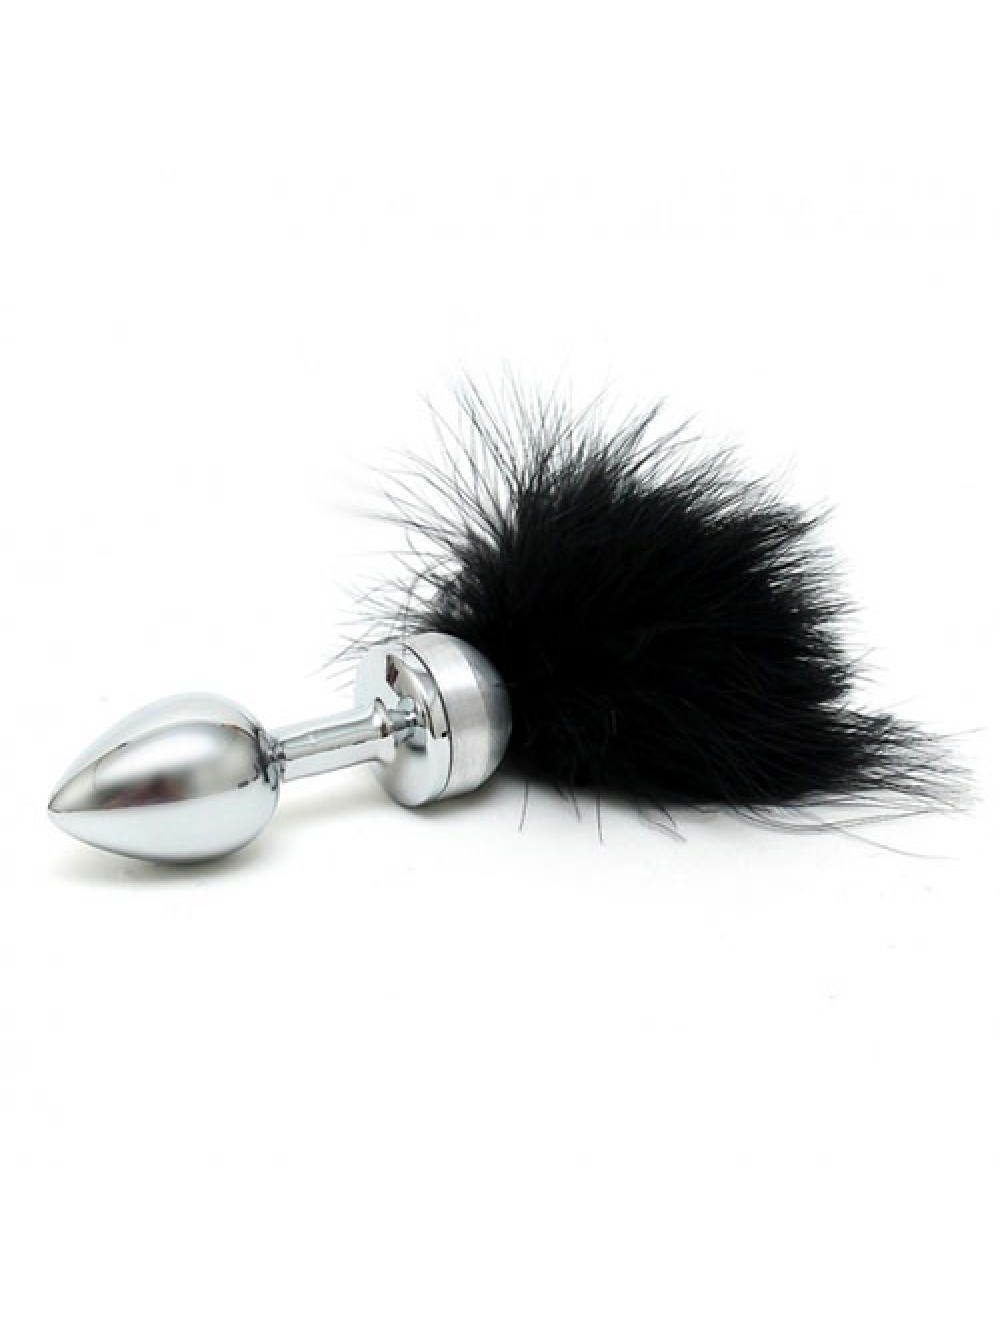 Small Butt Plug With Black Feathers 8718924235751